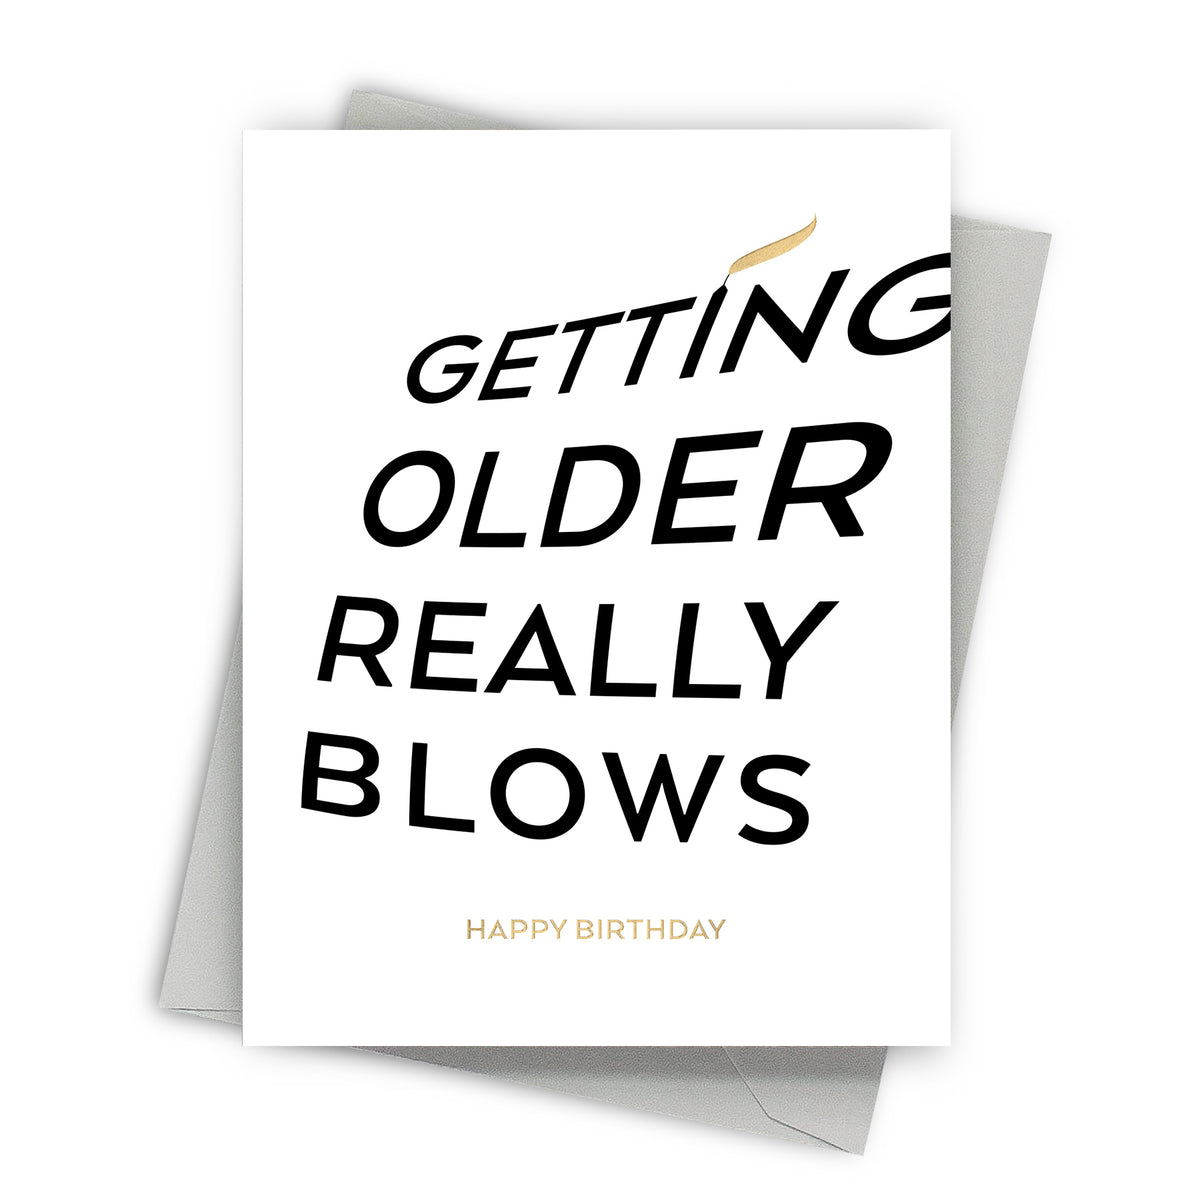 Really Blows Birthday Card by Fine Moments